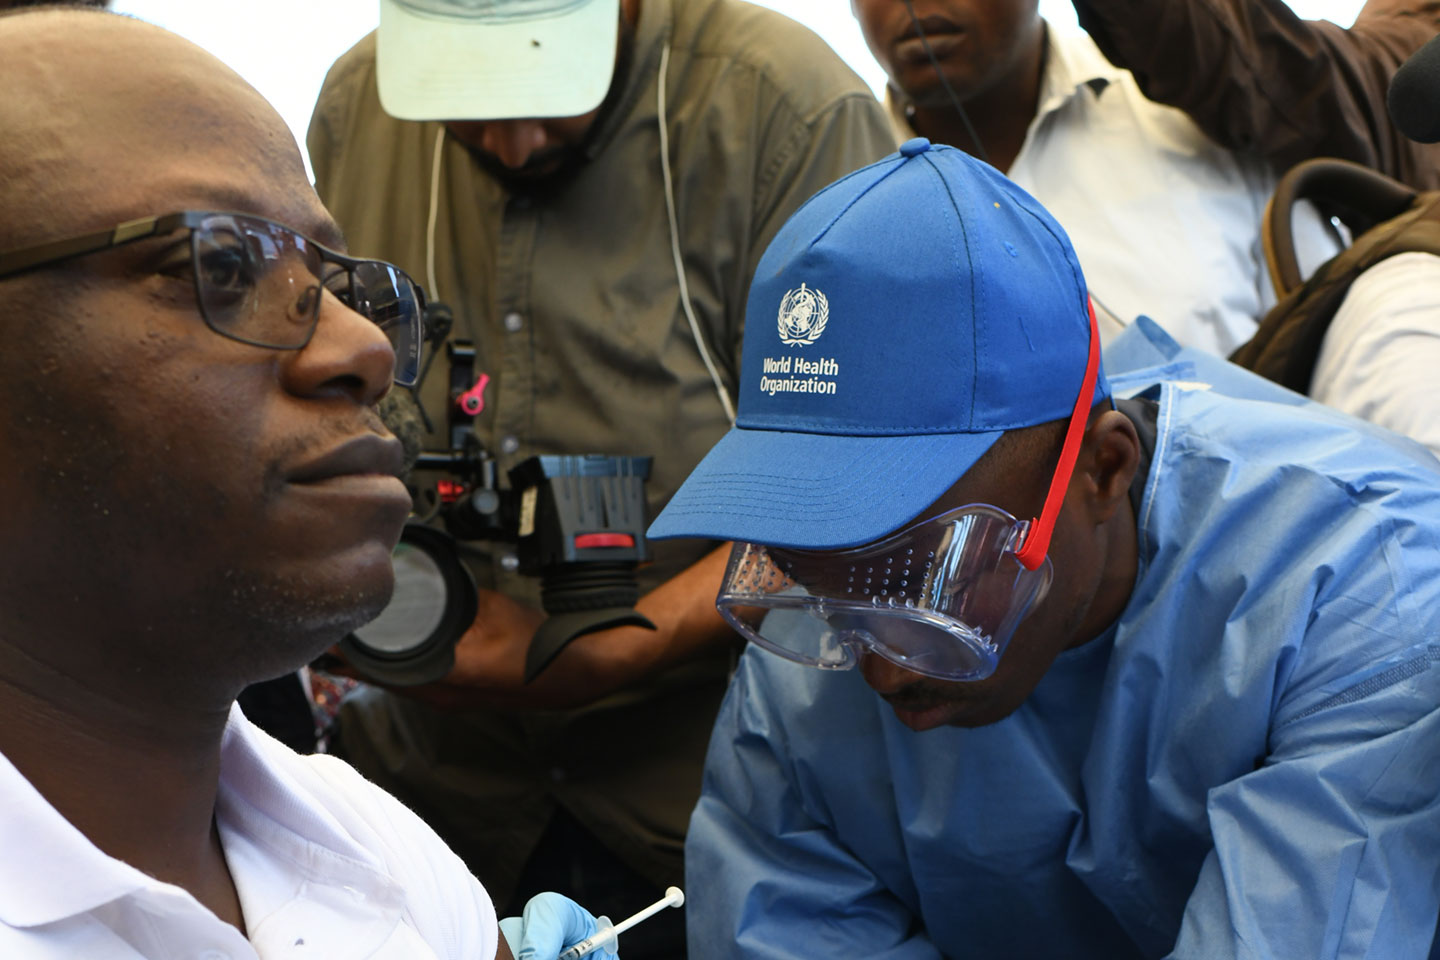 EPI manager Dr Guillaume Ngoie Mwamba receives the first vaccination against Ebola in the DRC in response to the 2018 Equateur province outbreak. Credit: Gavi/2018/Pascal Emmanuel Barollier.